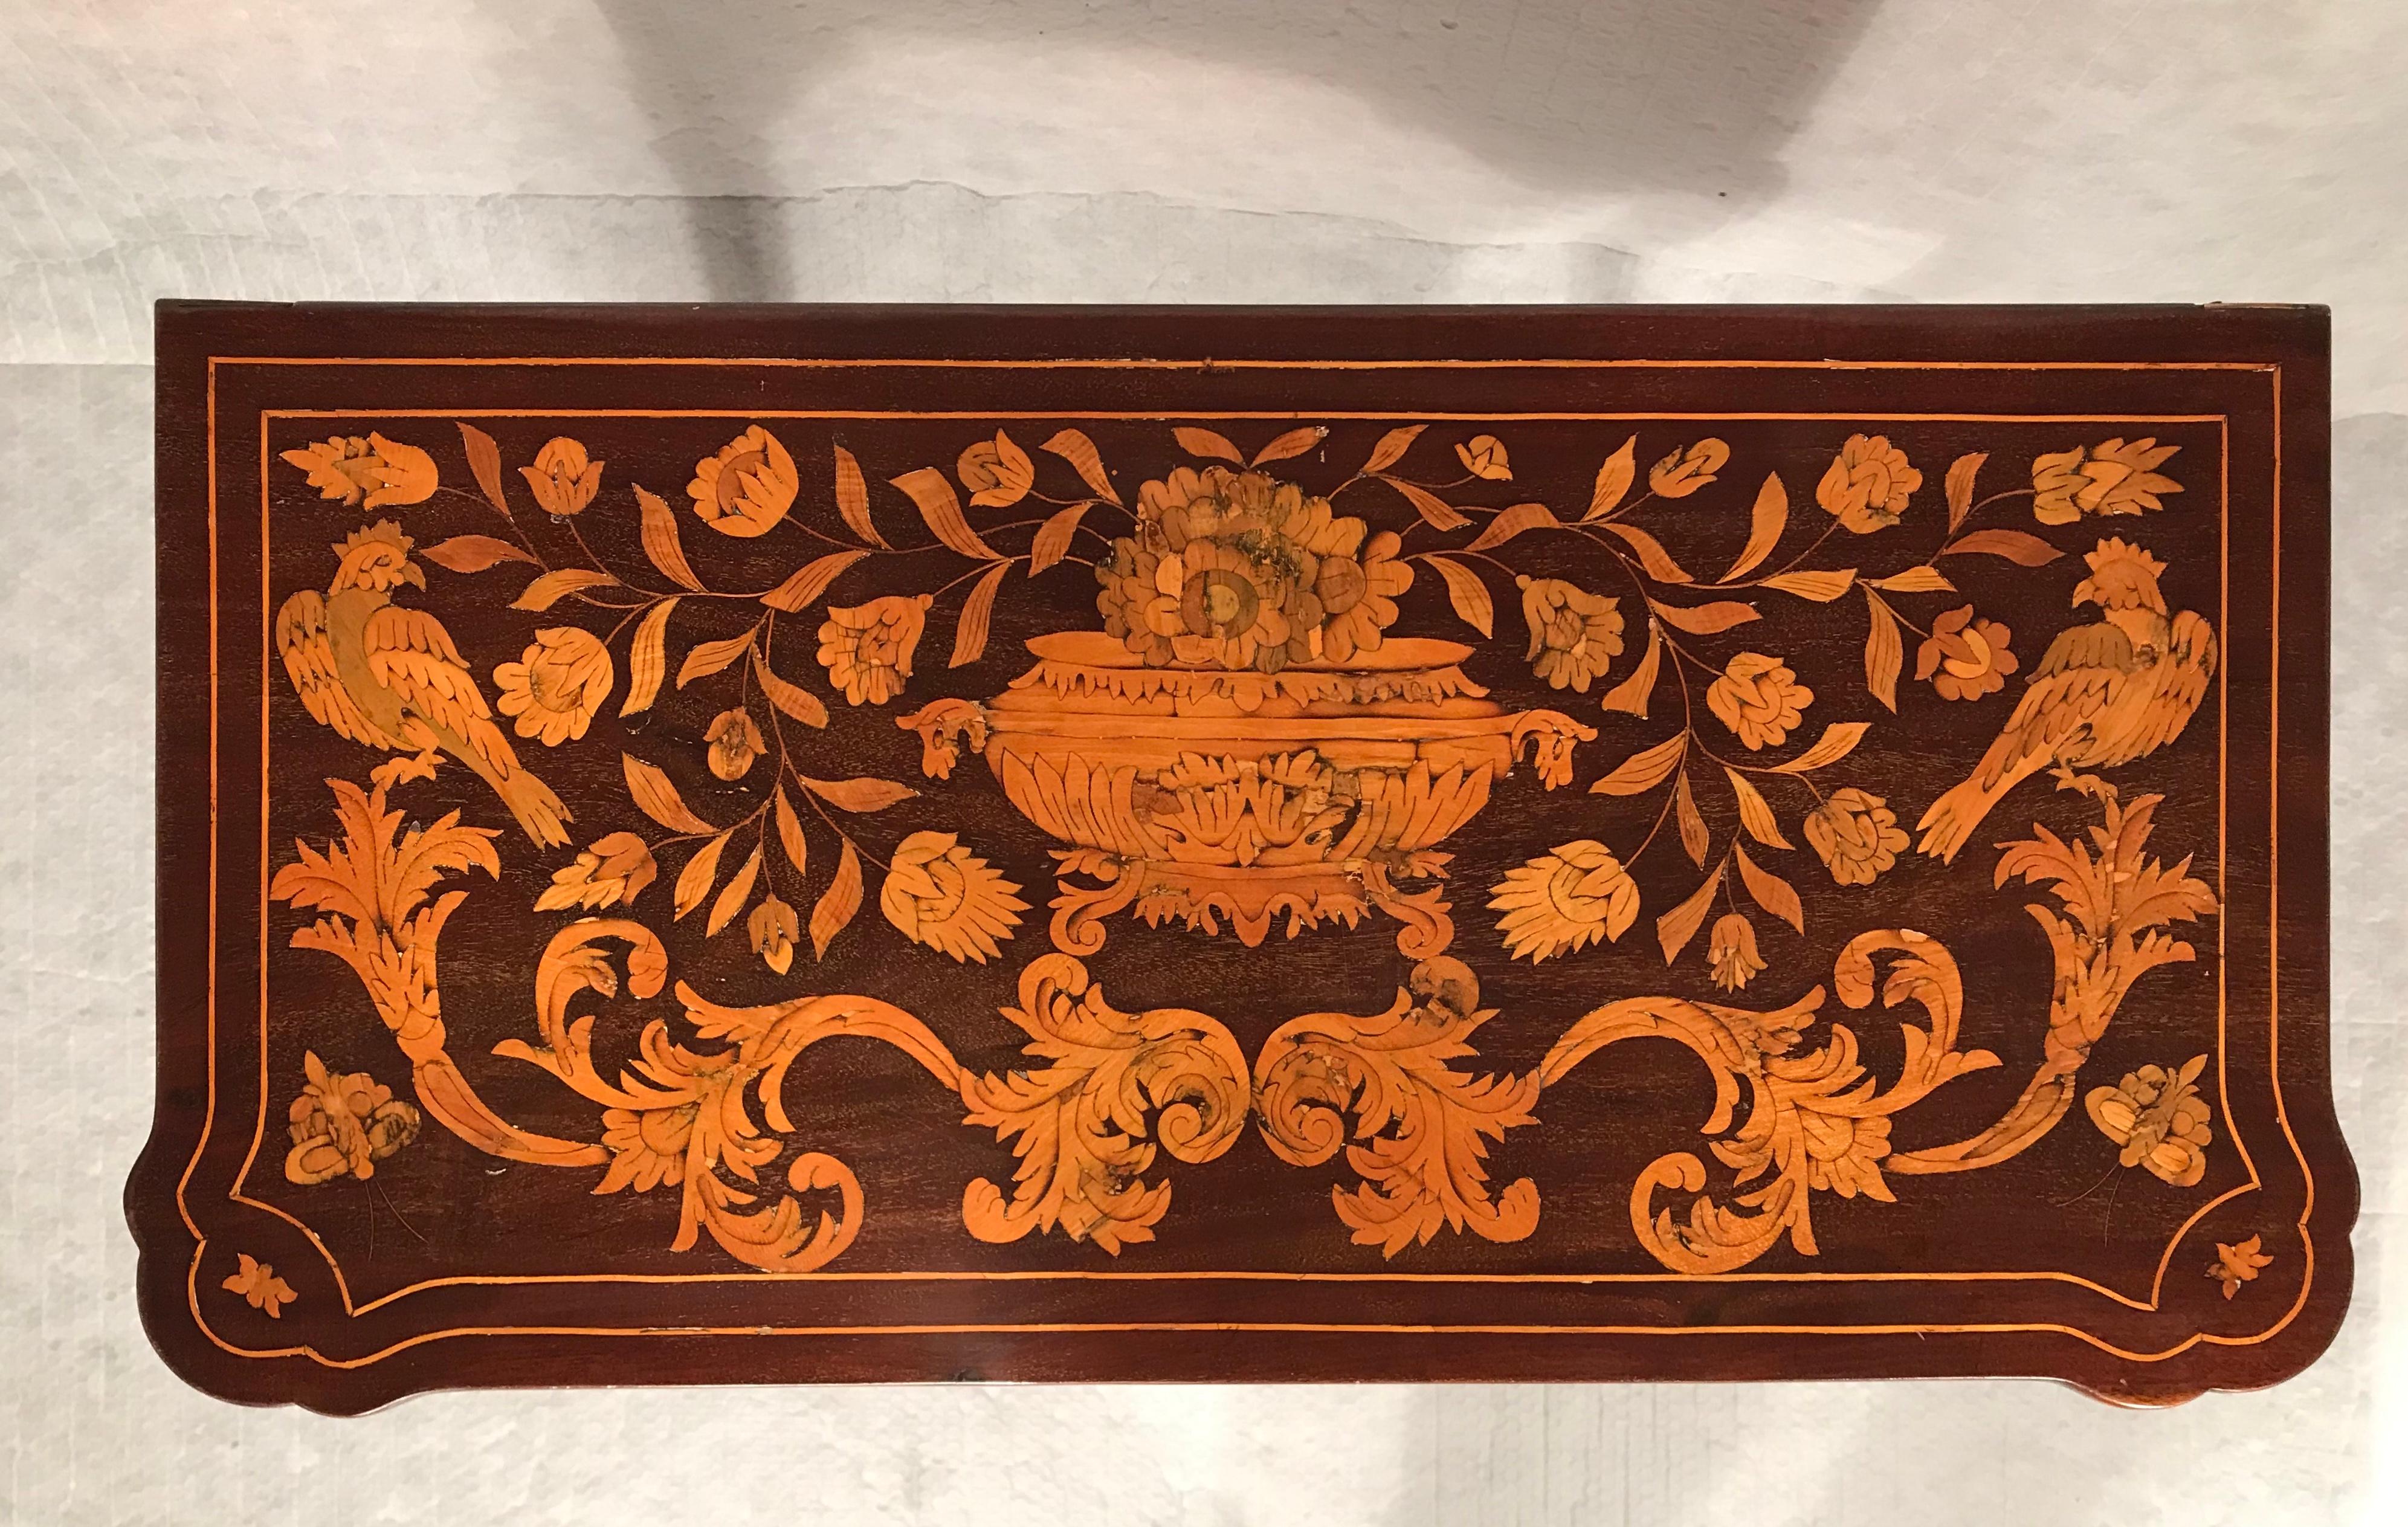 Exceptional 18th century Dutch card table, circa 1760. Beautiful marquetry with flowers and birds on the top and sides. The unfolded table shows inlays of an ornamental medaillion in the middle and one playing card in each corner. On each side of